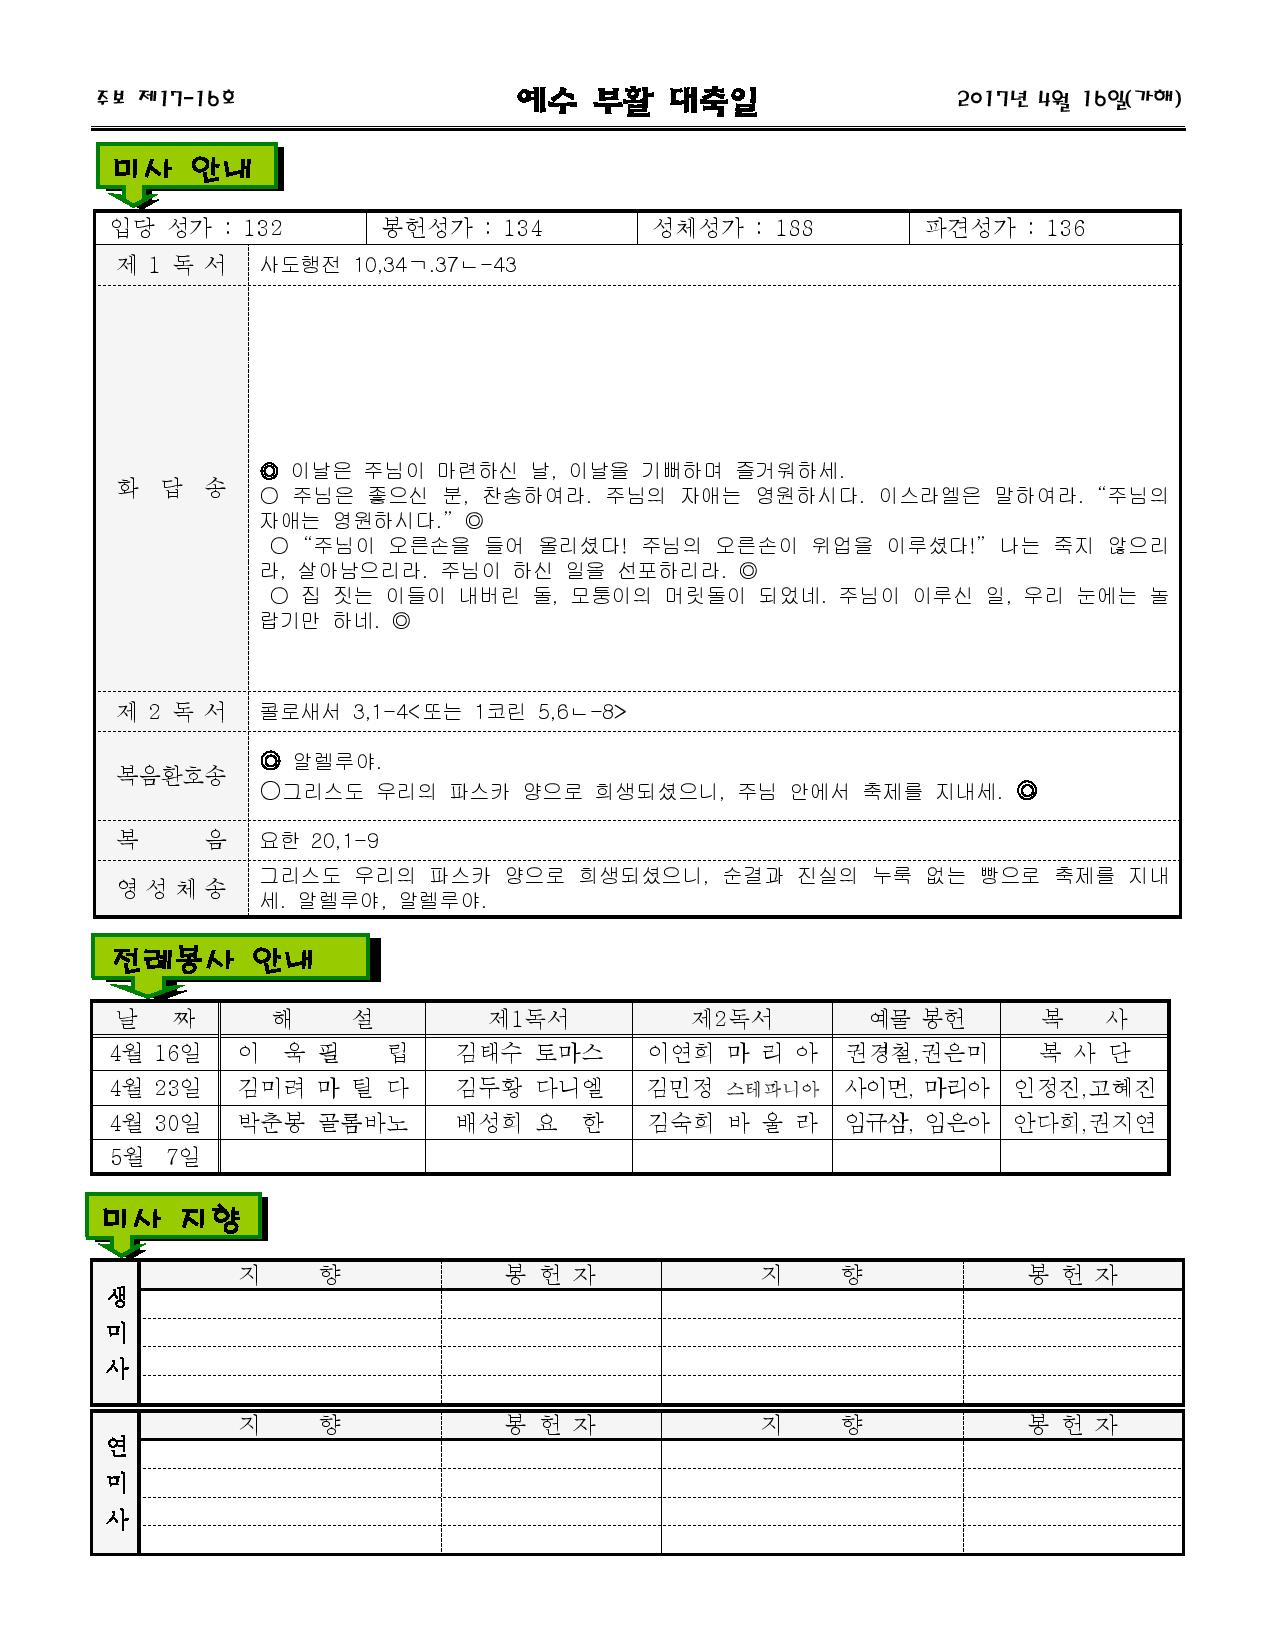 Document-page-002.jpg